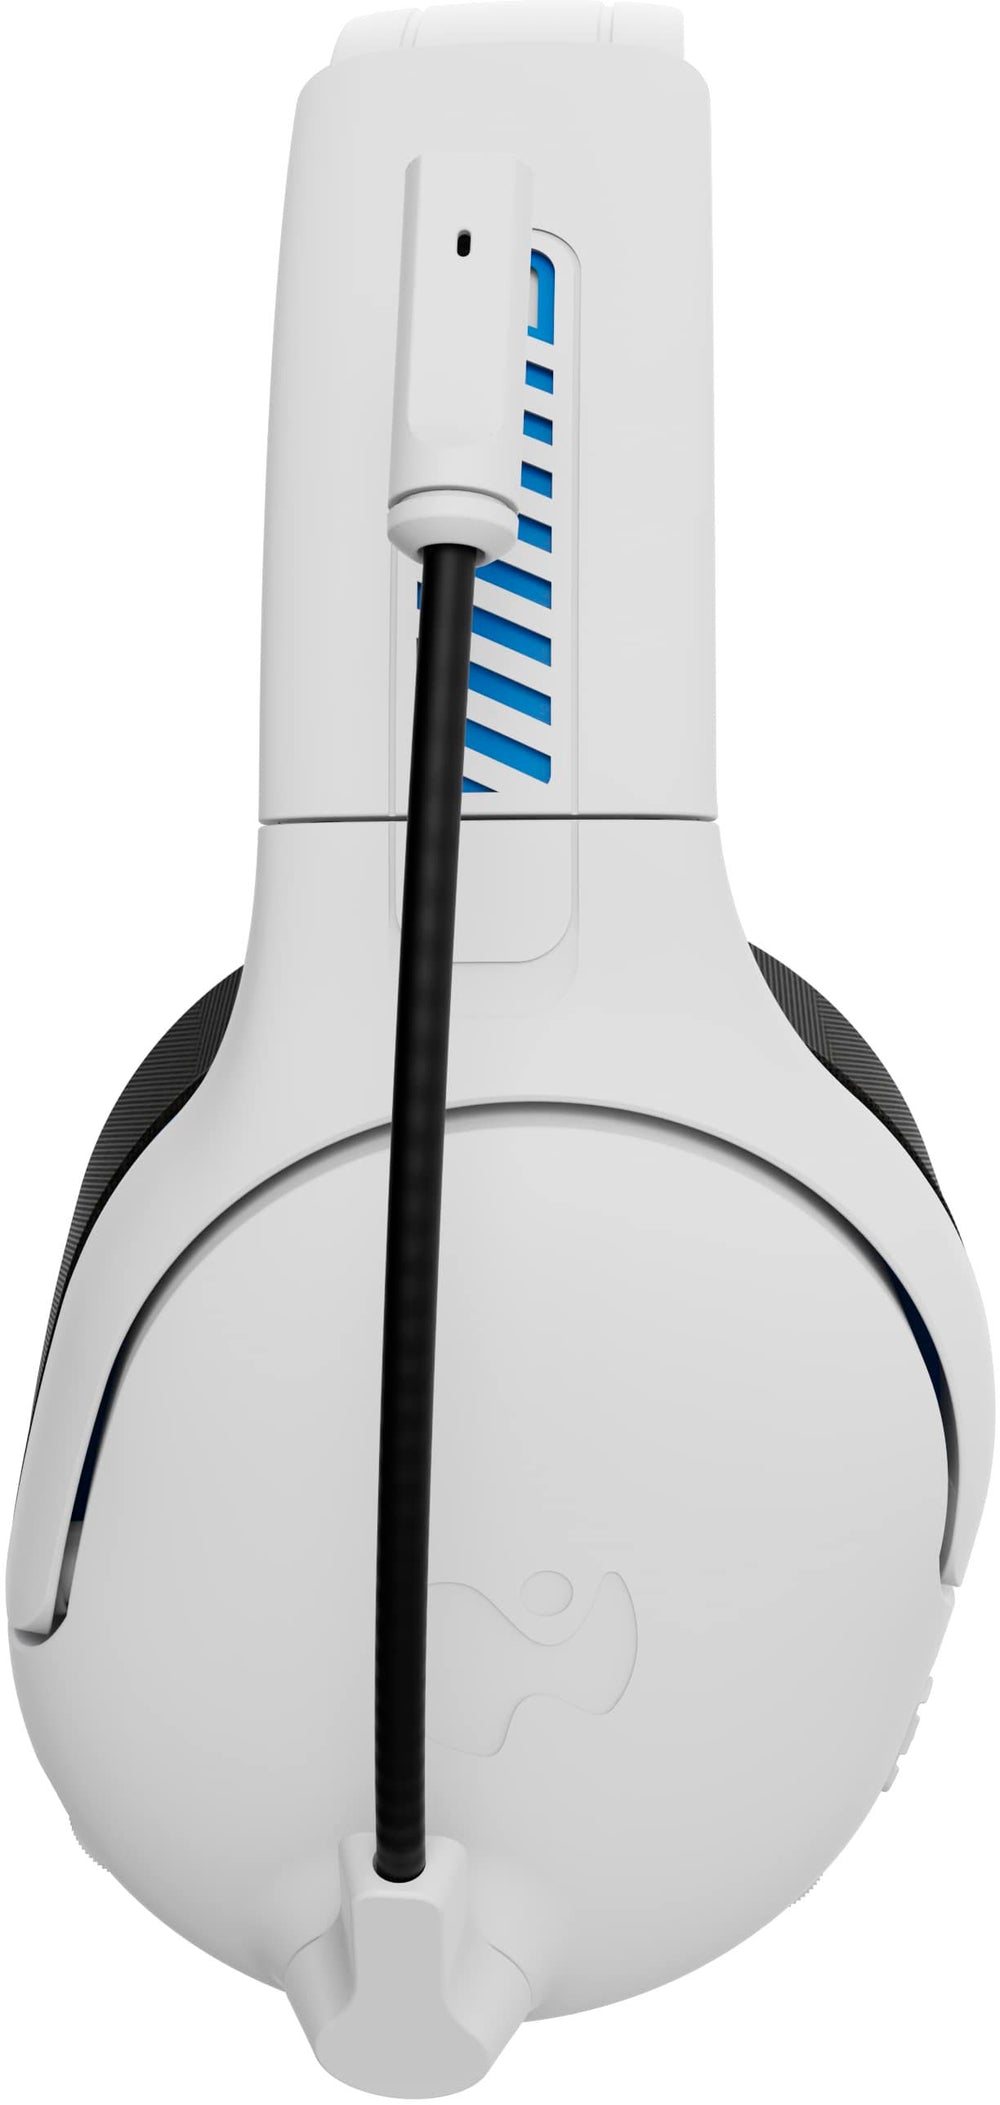 PDP AIRLITE Pro Wireless Headset: Frost White For PlayStation 5, PlayStation 4 - Frost White_1